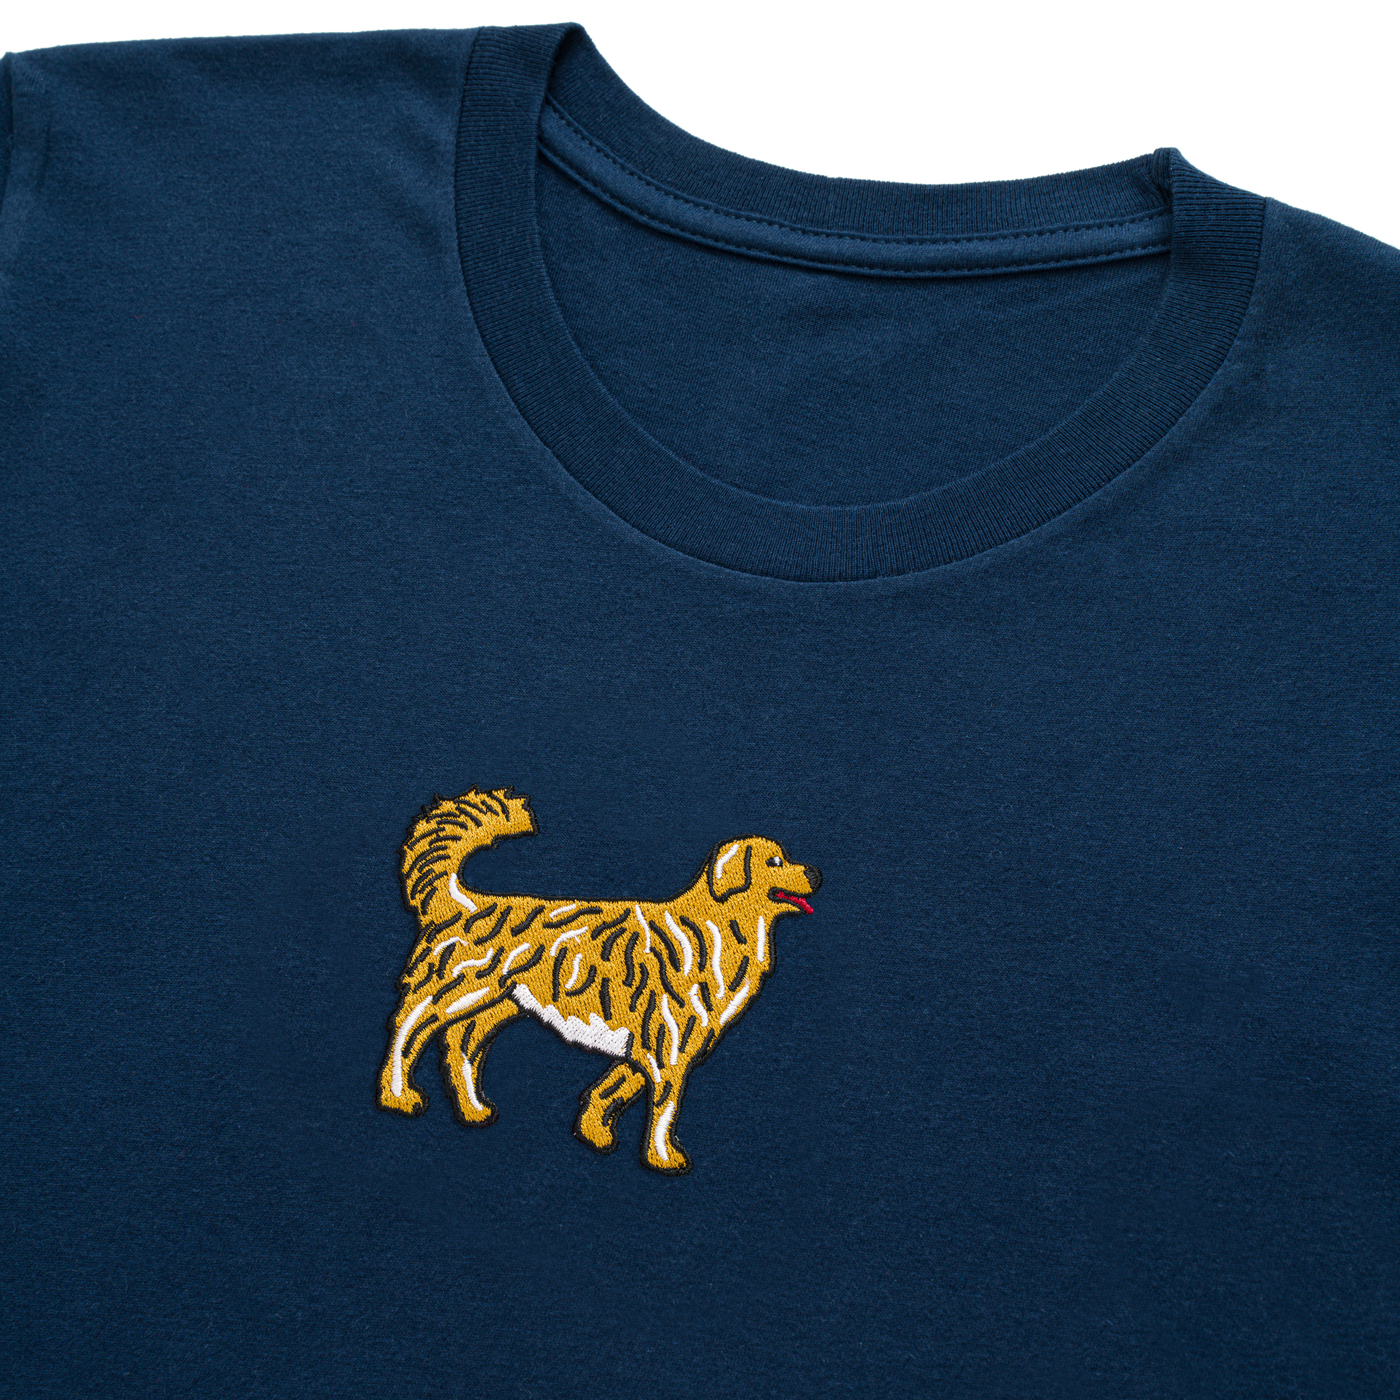 Bobby's Planet Kids Embroidered Golden Retriever T-Shirt from Paws Dog Cat Animals Collection in Navy Color#color_navy